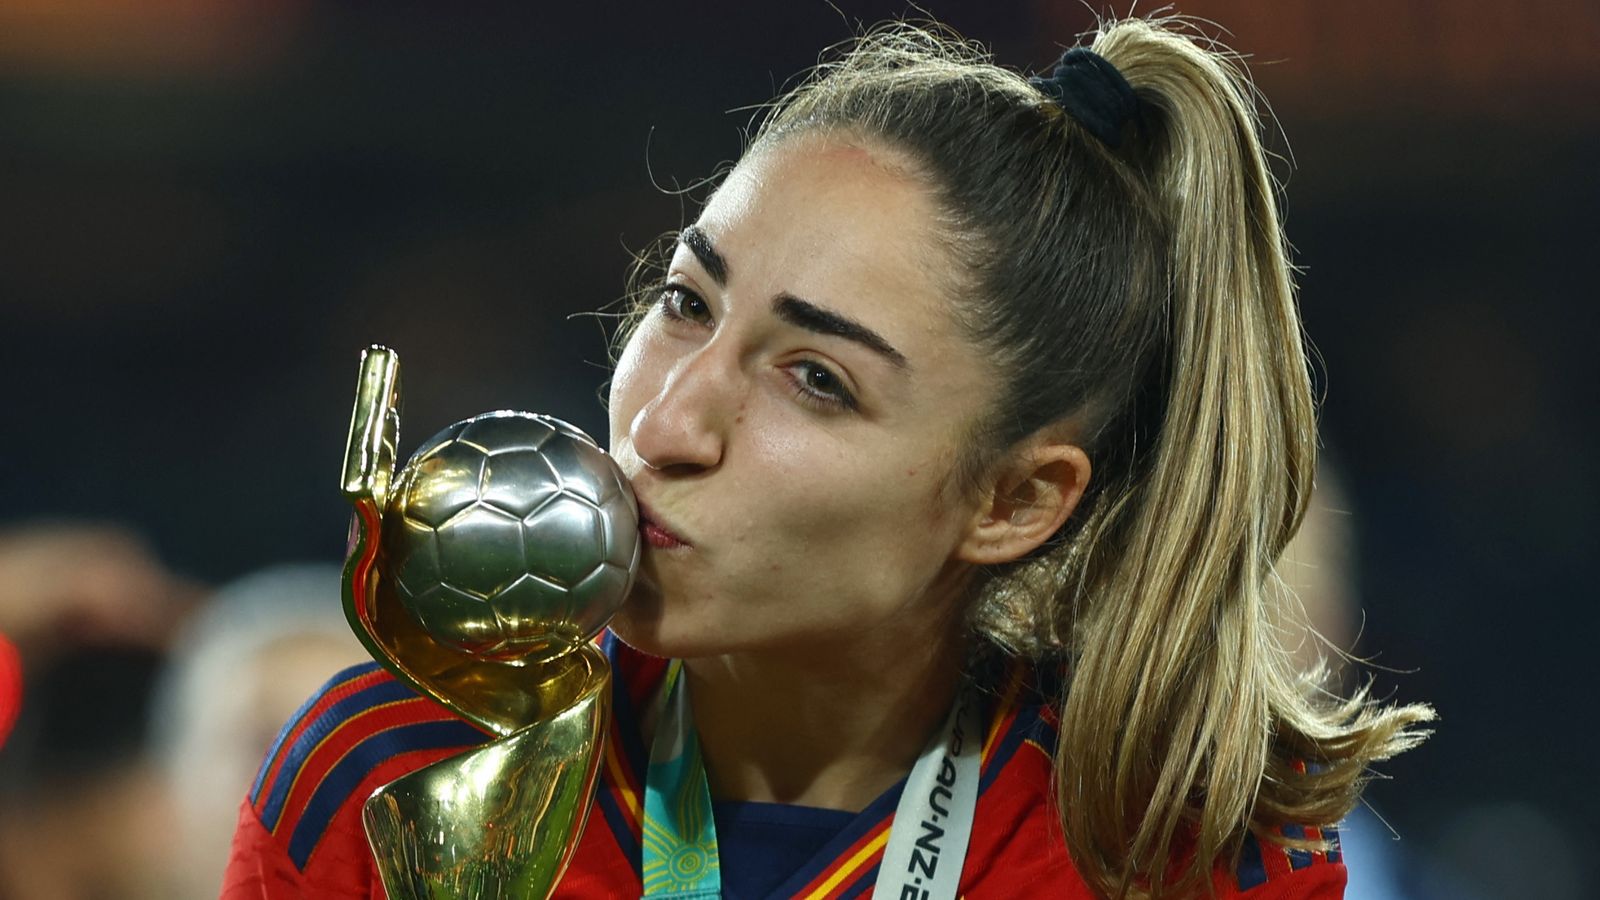 Women's World Cup: Spain's match-winner Olga Carmona learns of father's death after game